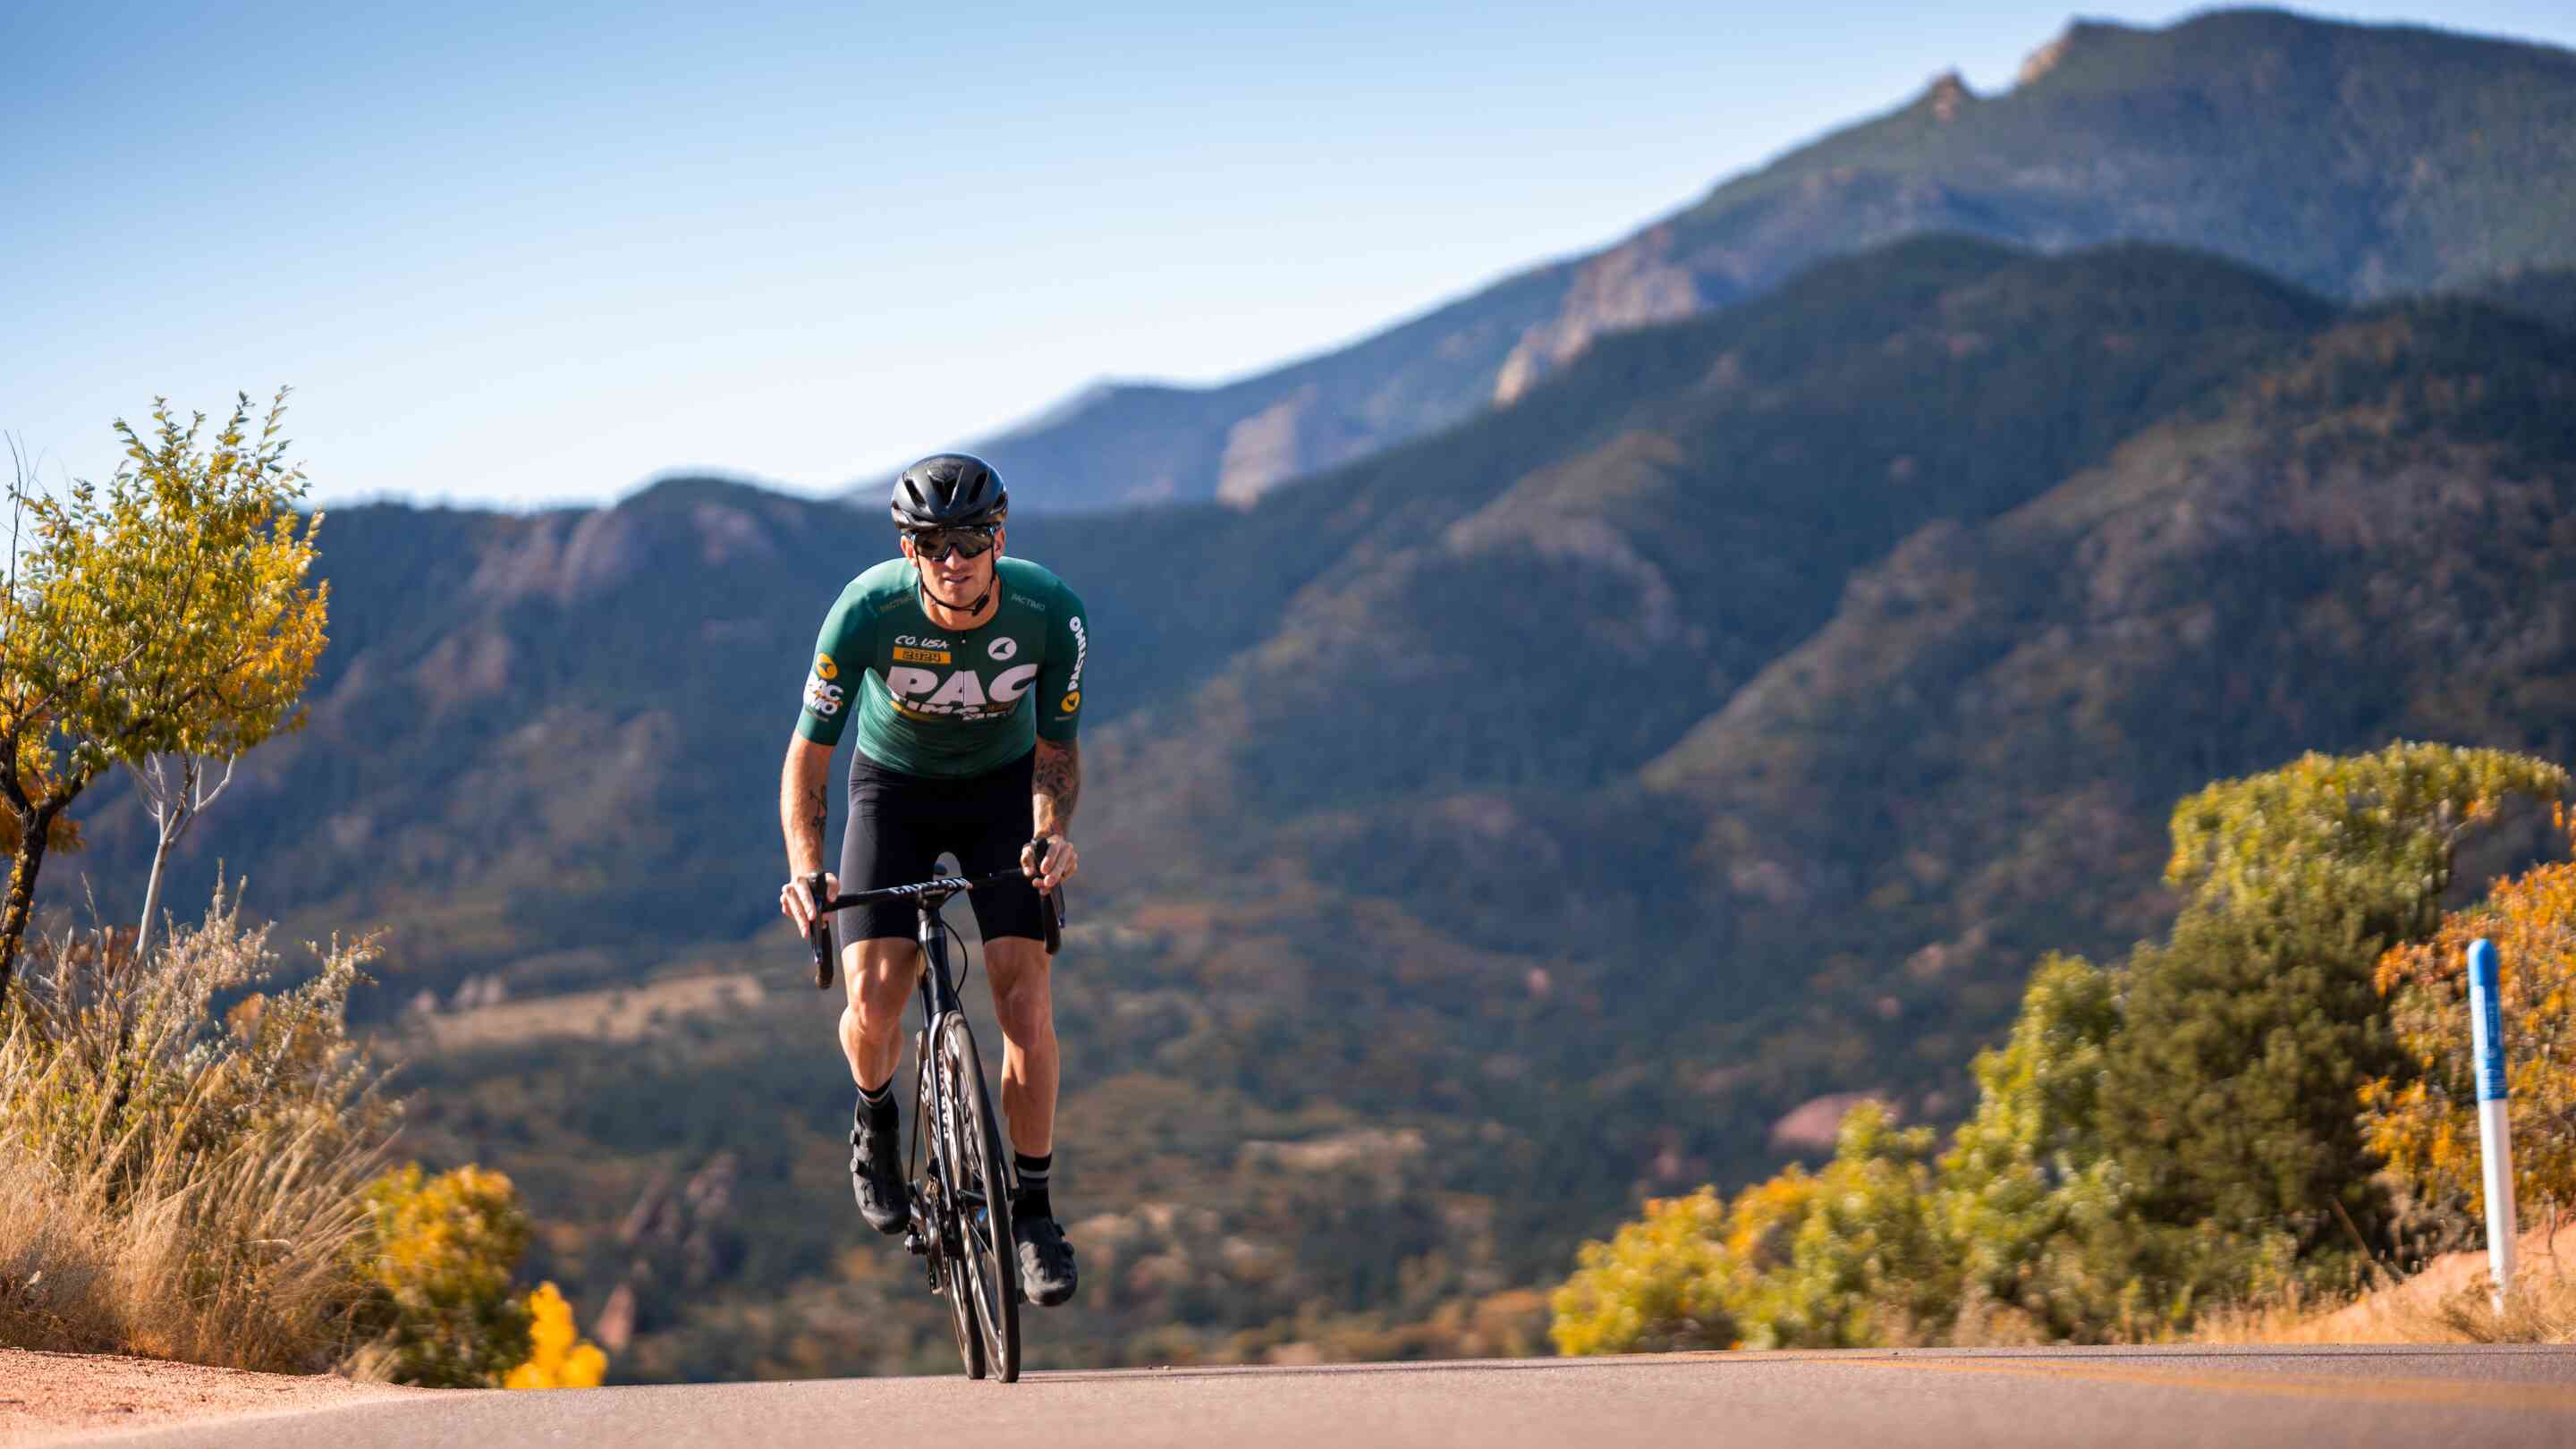 Cyclist in Pactimo's new spring '24 Flyte Jersey